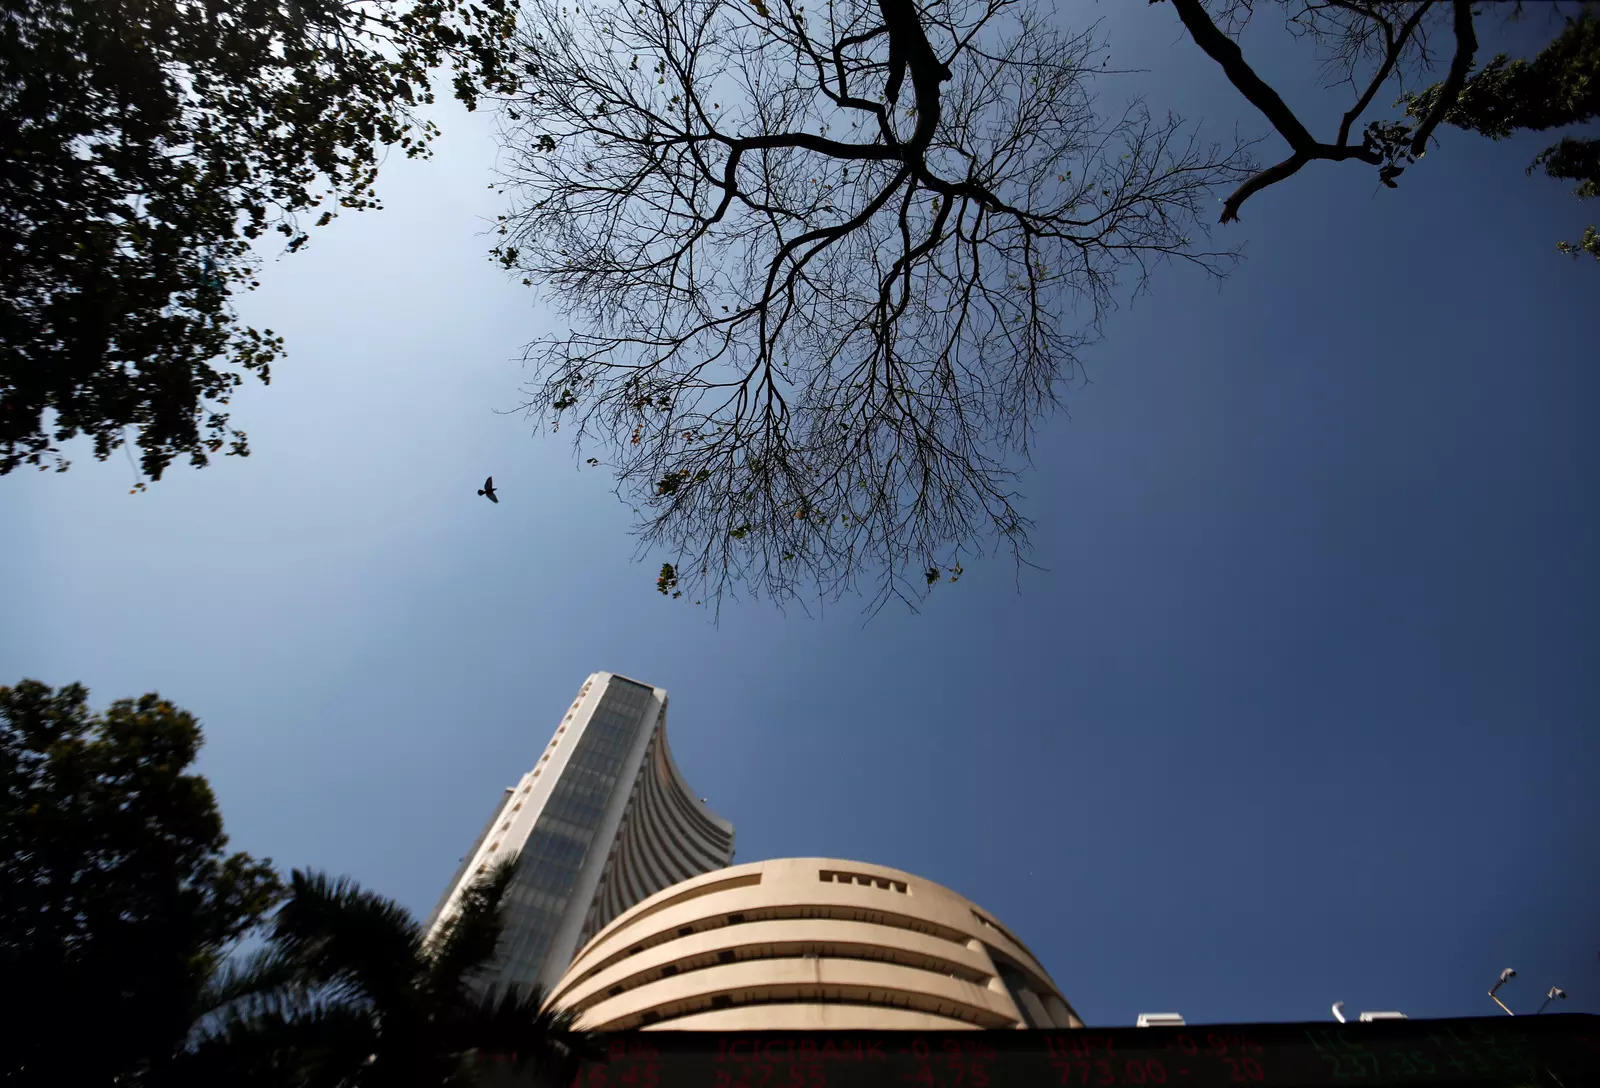  Indian equity markets are likely to open in the red, tracking global cues after the US Federal Reserve raised rates by 75 basis points for the third straight time from 3 per cent to 3.25 per cent.